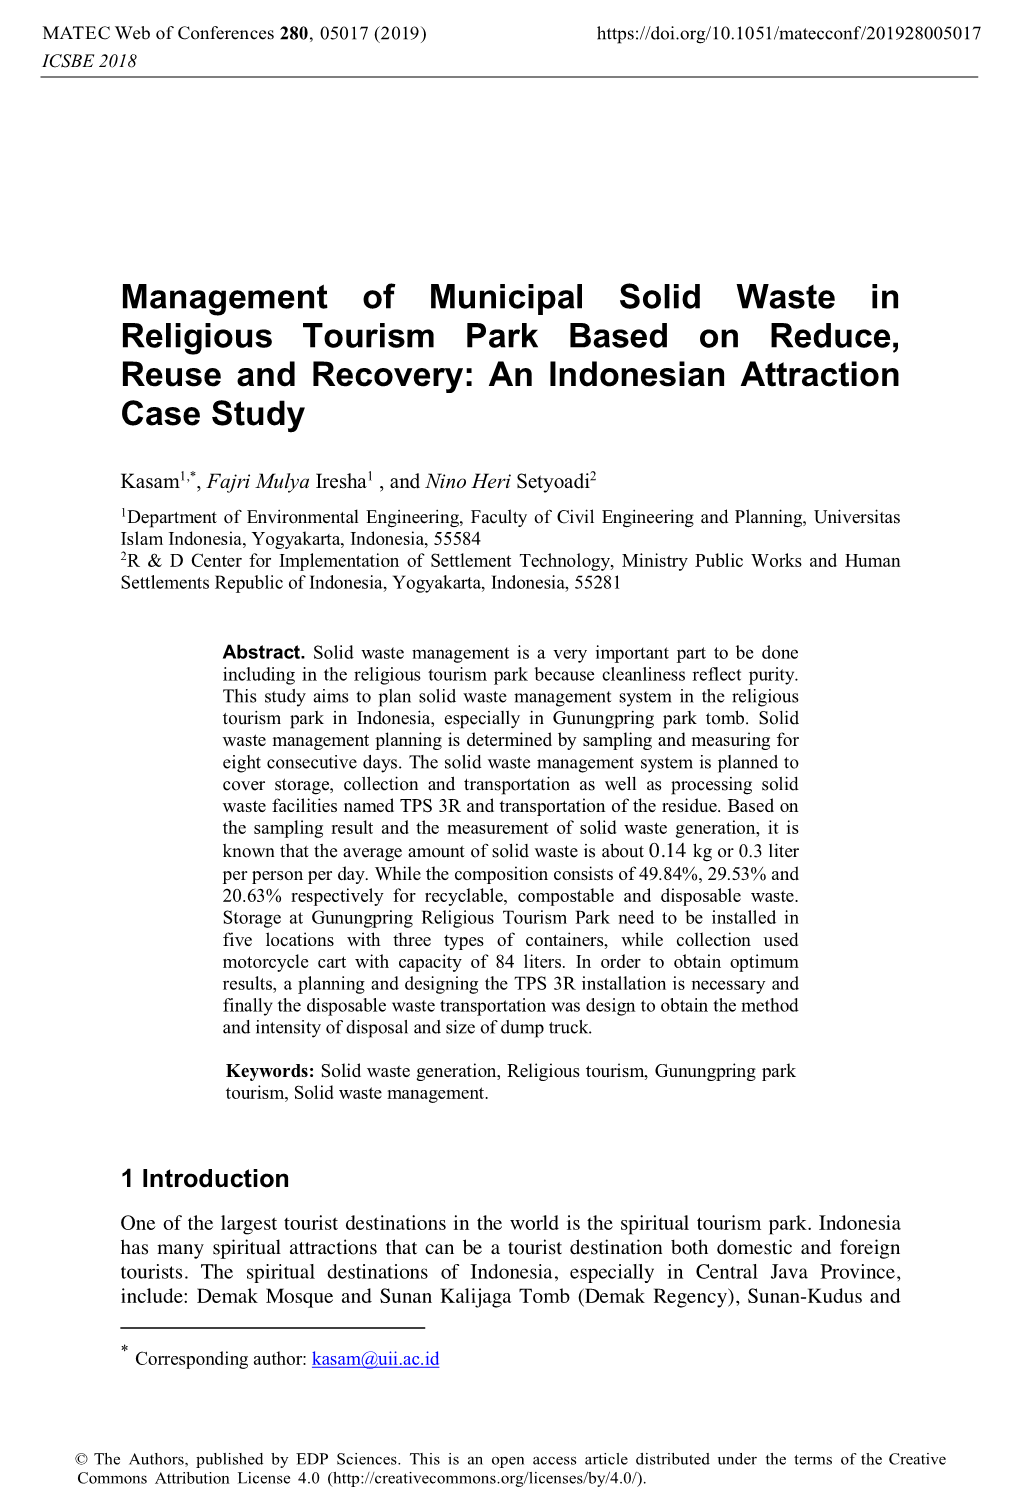 Management of Municipal Solid Waste in Religious Tourism Park Based on Reduce, Reuse and Recovery: an Indonesian Attraction Case Study